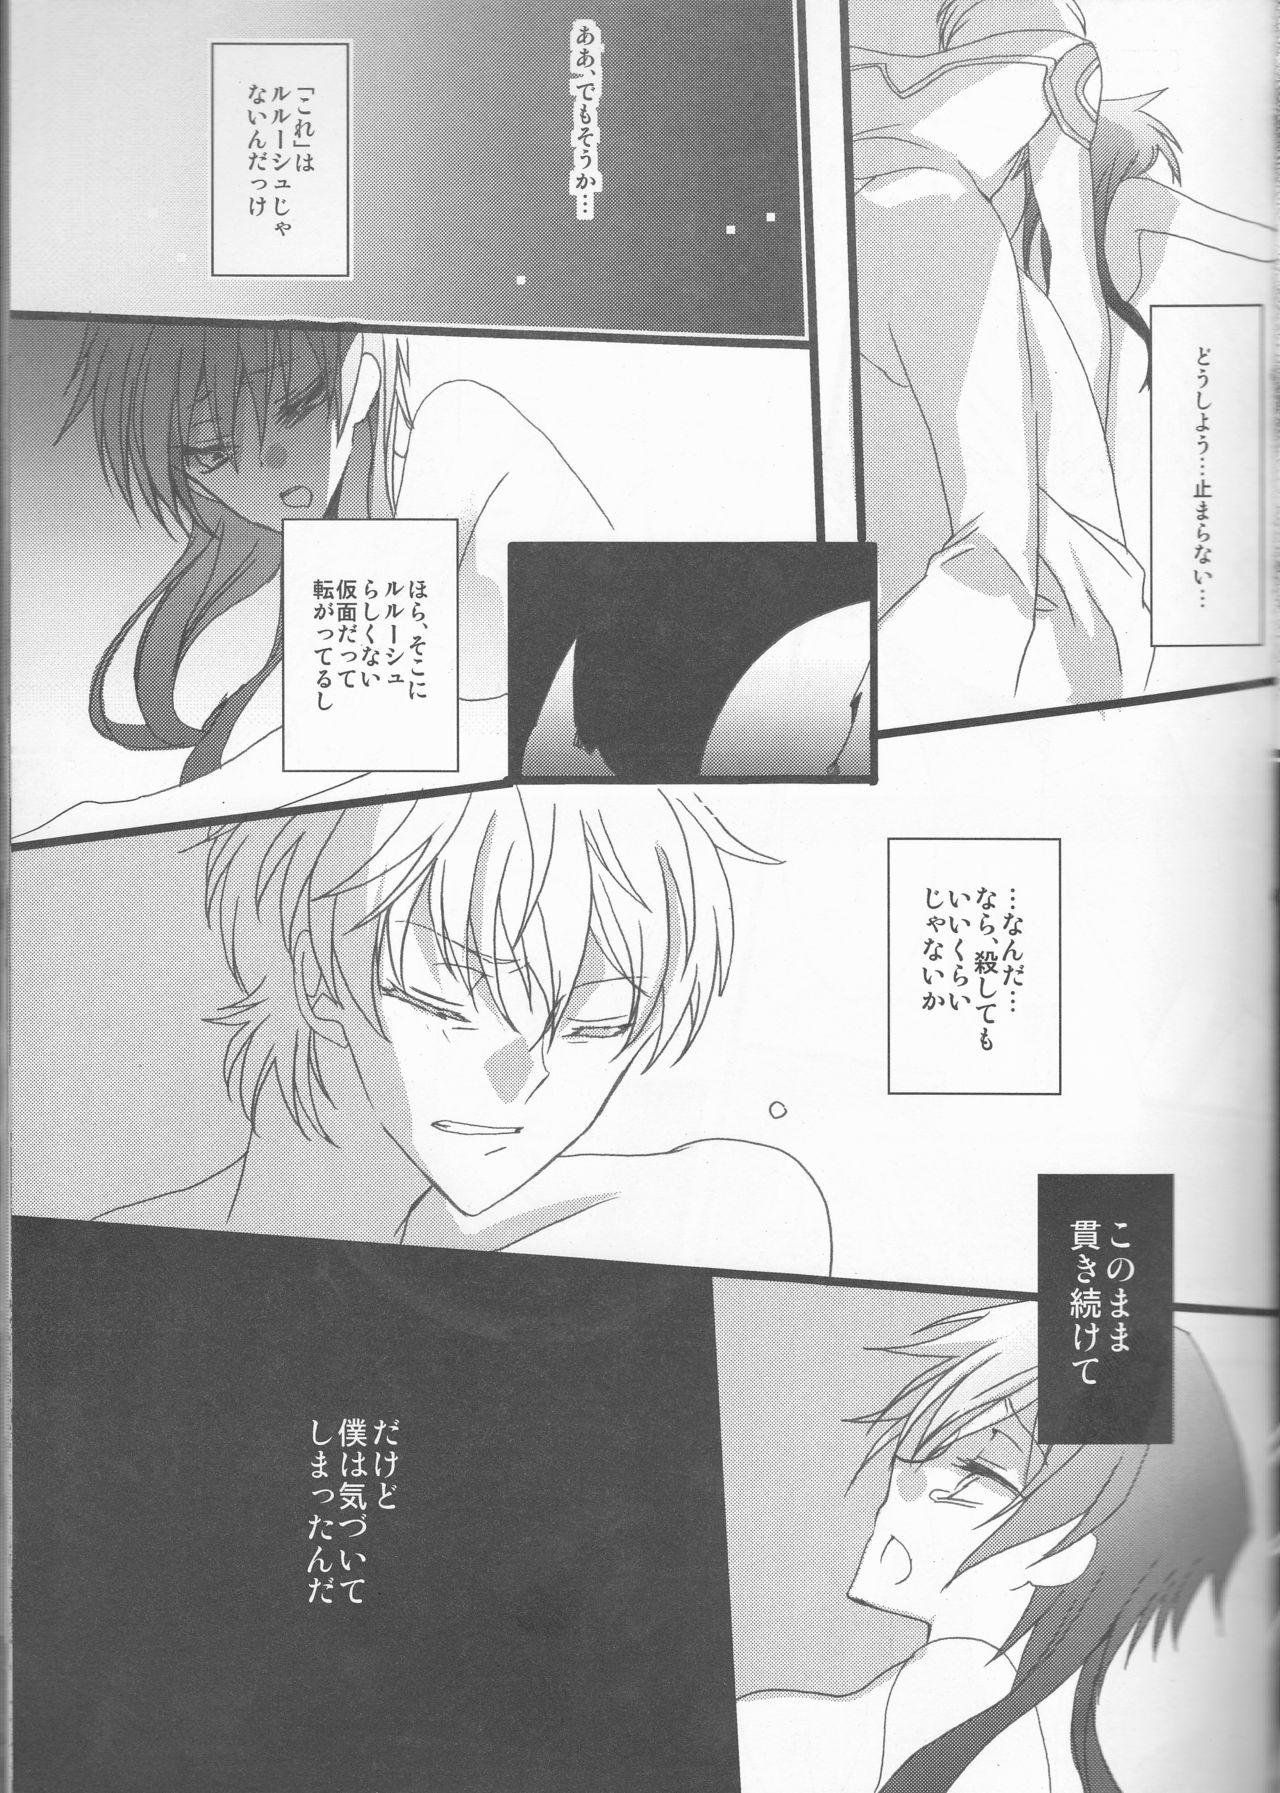 Large MASK - Code geass Anal Play - Page 8